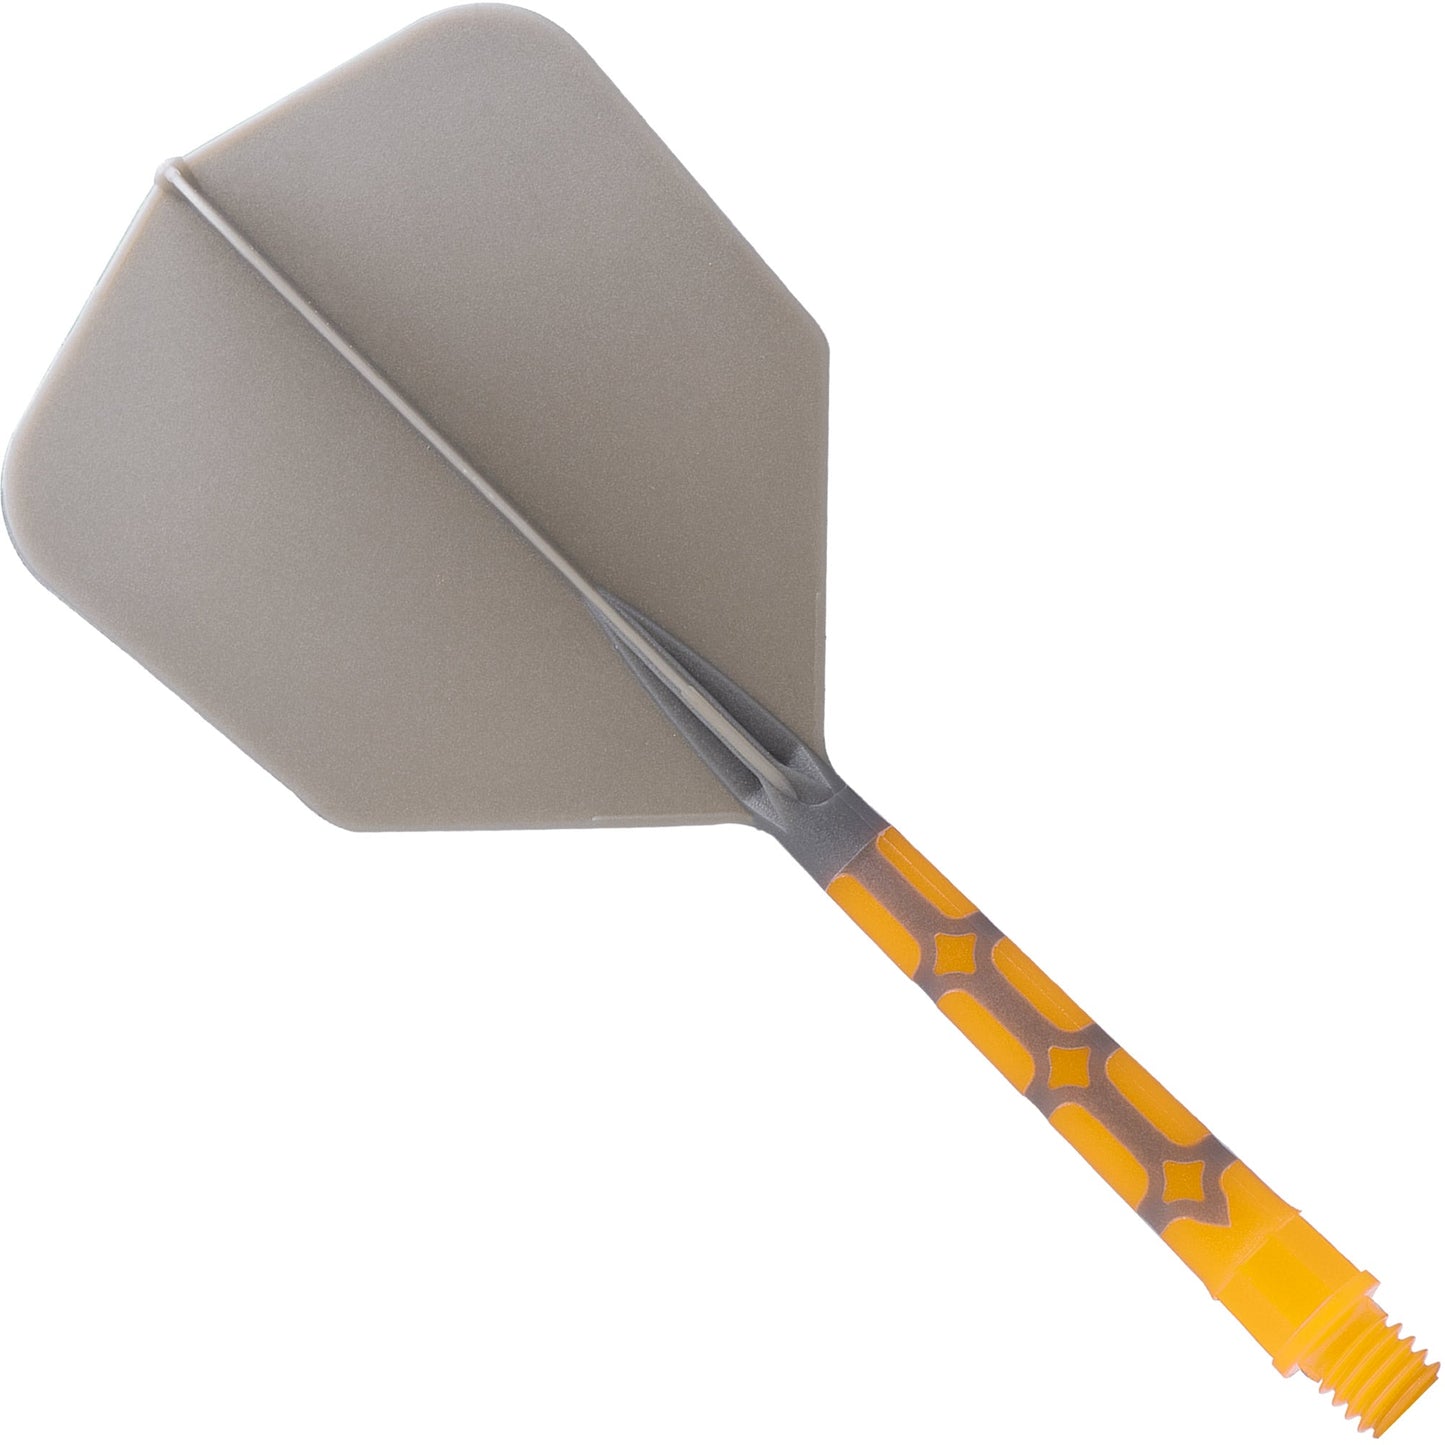 Cuesoul Rost T19 Integrated Dart Shaft and Flights - Big Wing - Yellow with Grey Flight Long